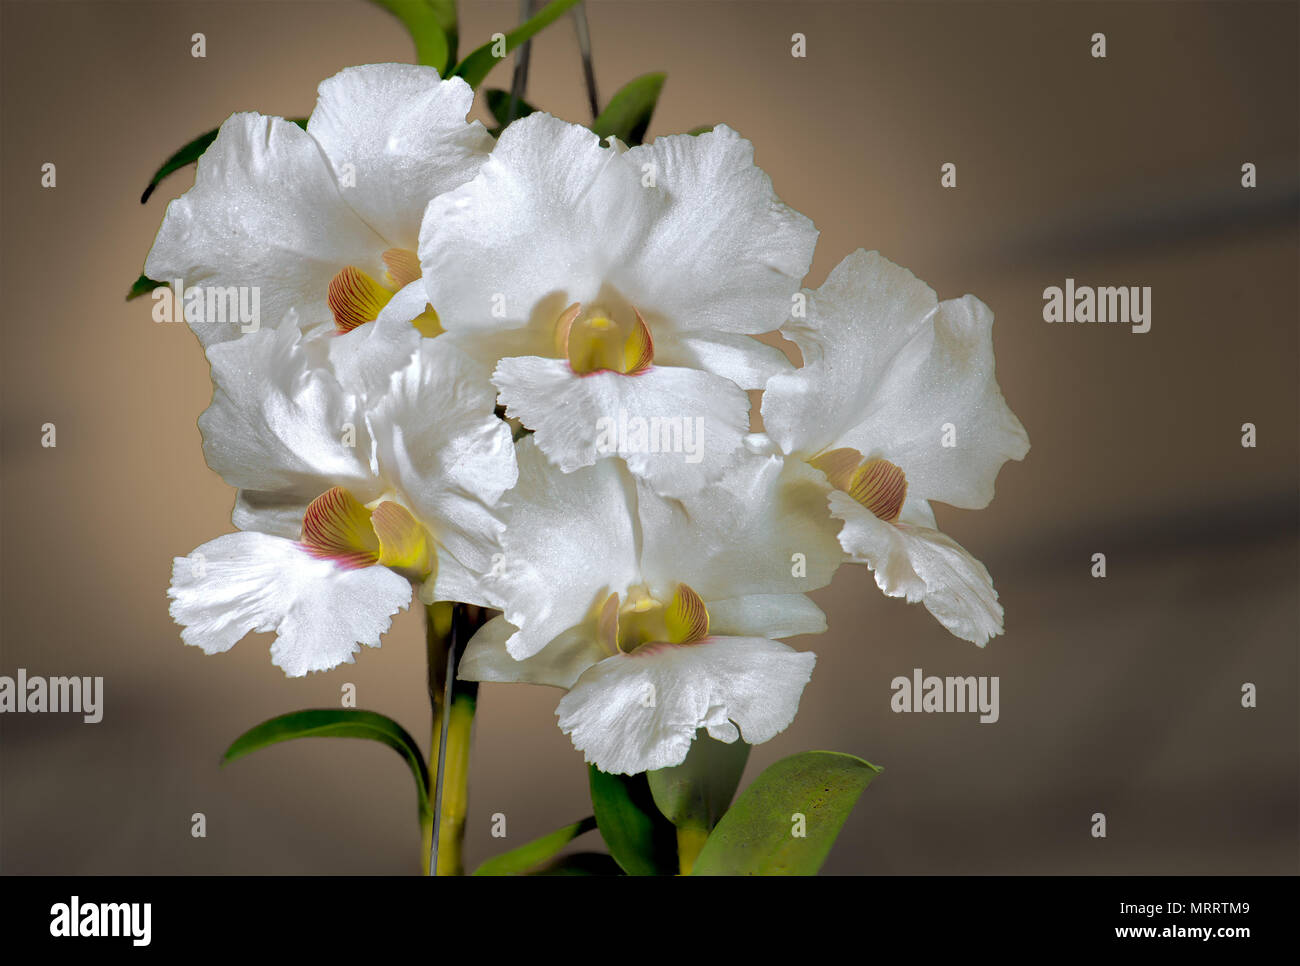 White Cattleya hybrid orchid on blurred background with clipping path. Stock Photo